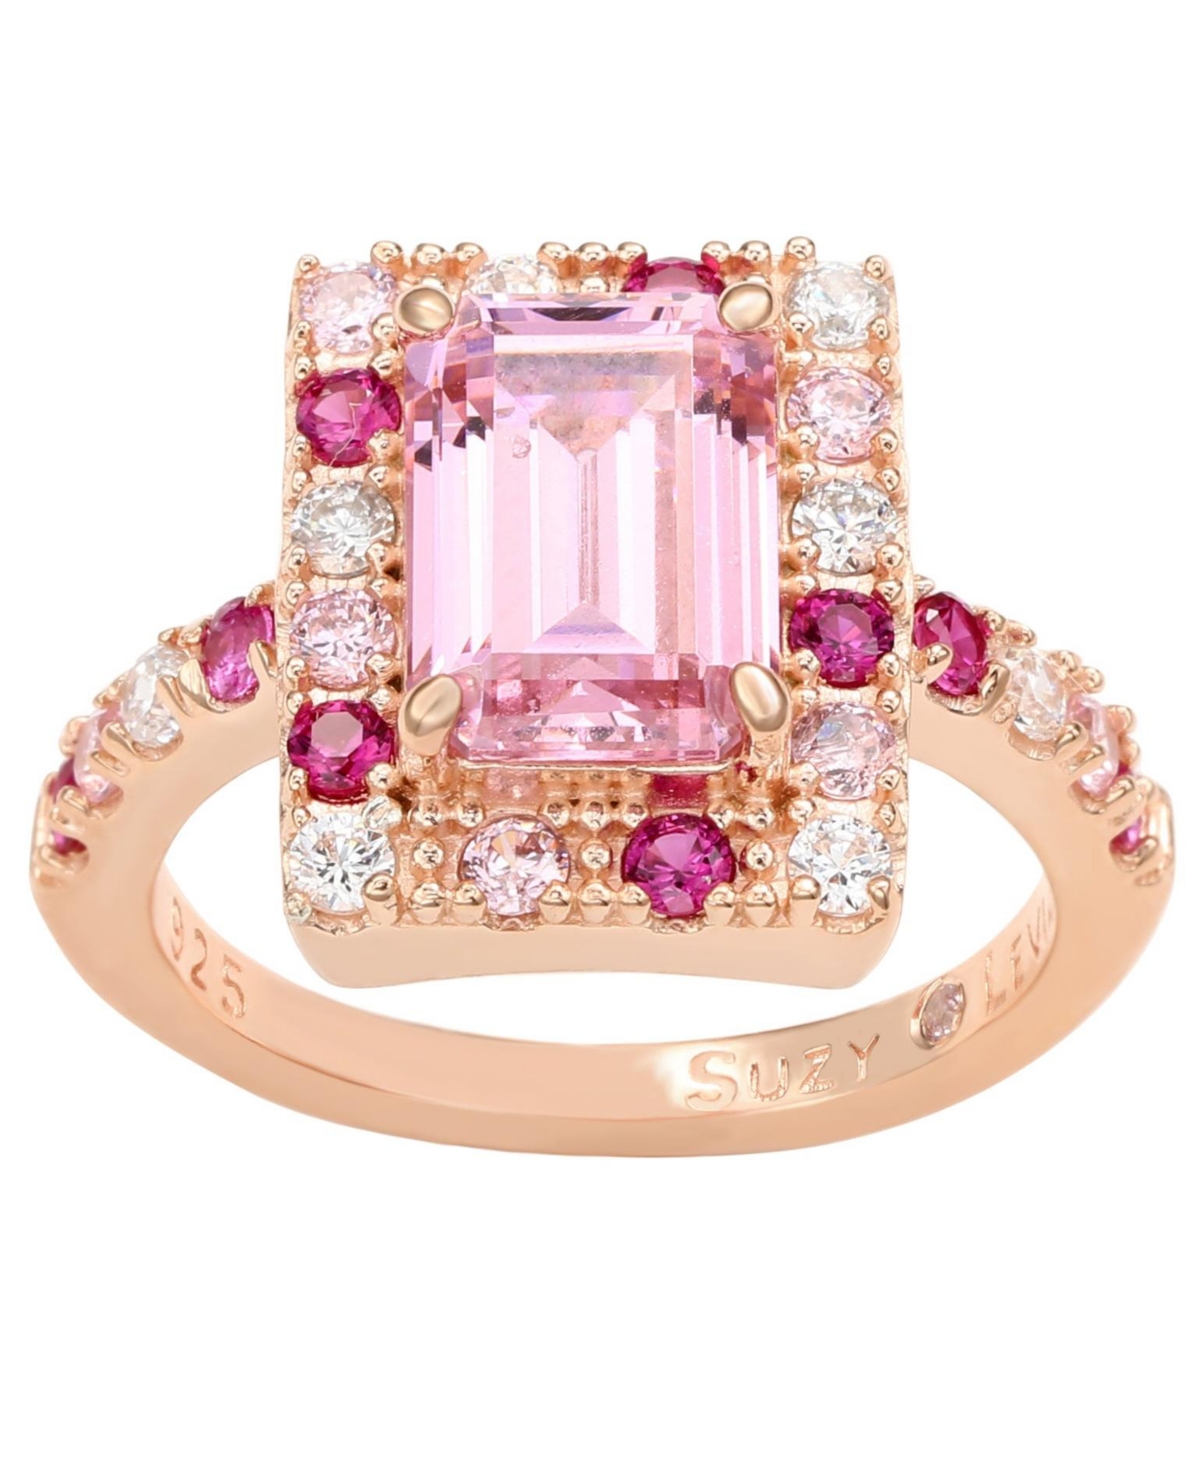 Suzy Levian Rose Sterling Silver Emerald Cut Pink Cubic Zirconia Ring - Pink